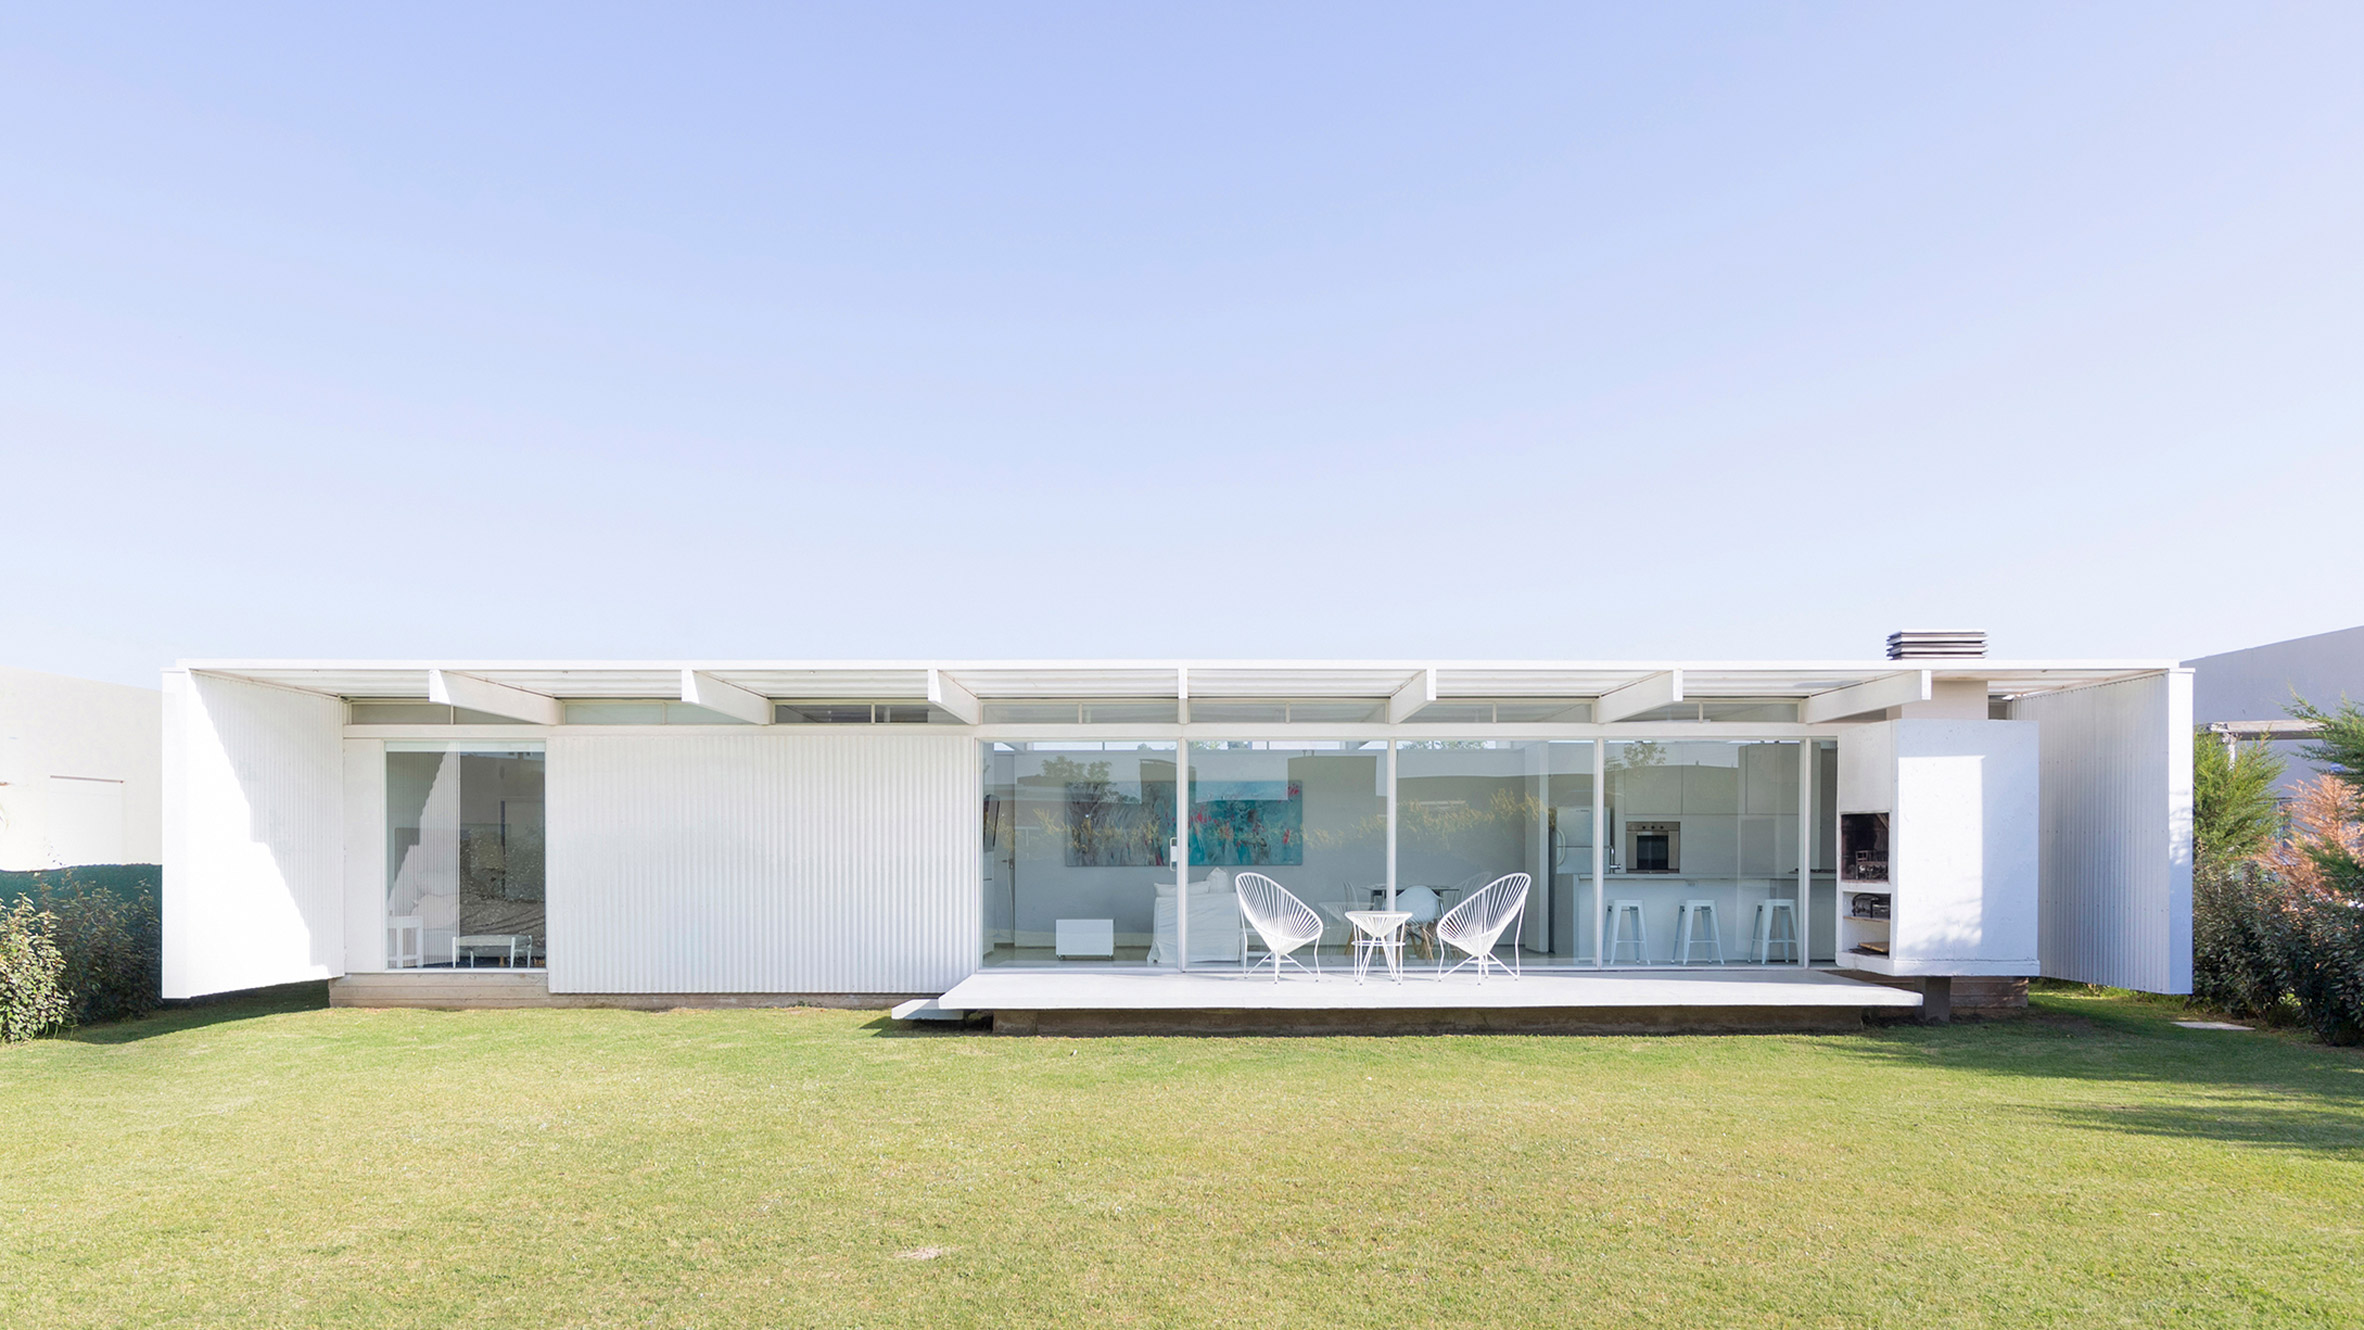 Bernardo Rosello's minimal house in Buenos Aires is almost entirely white